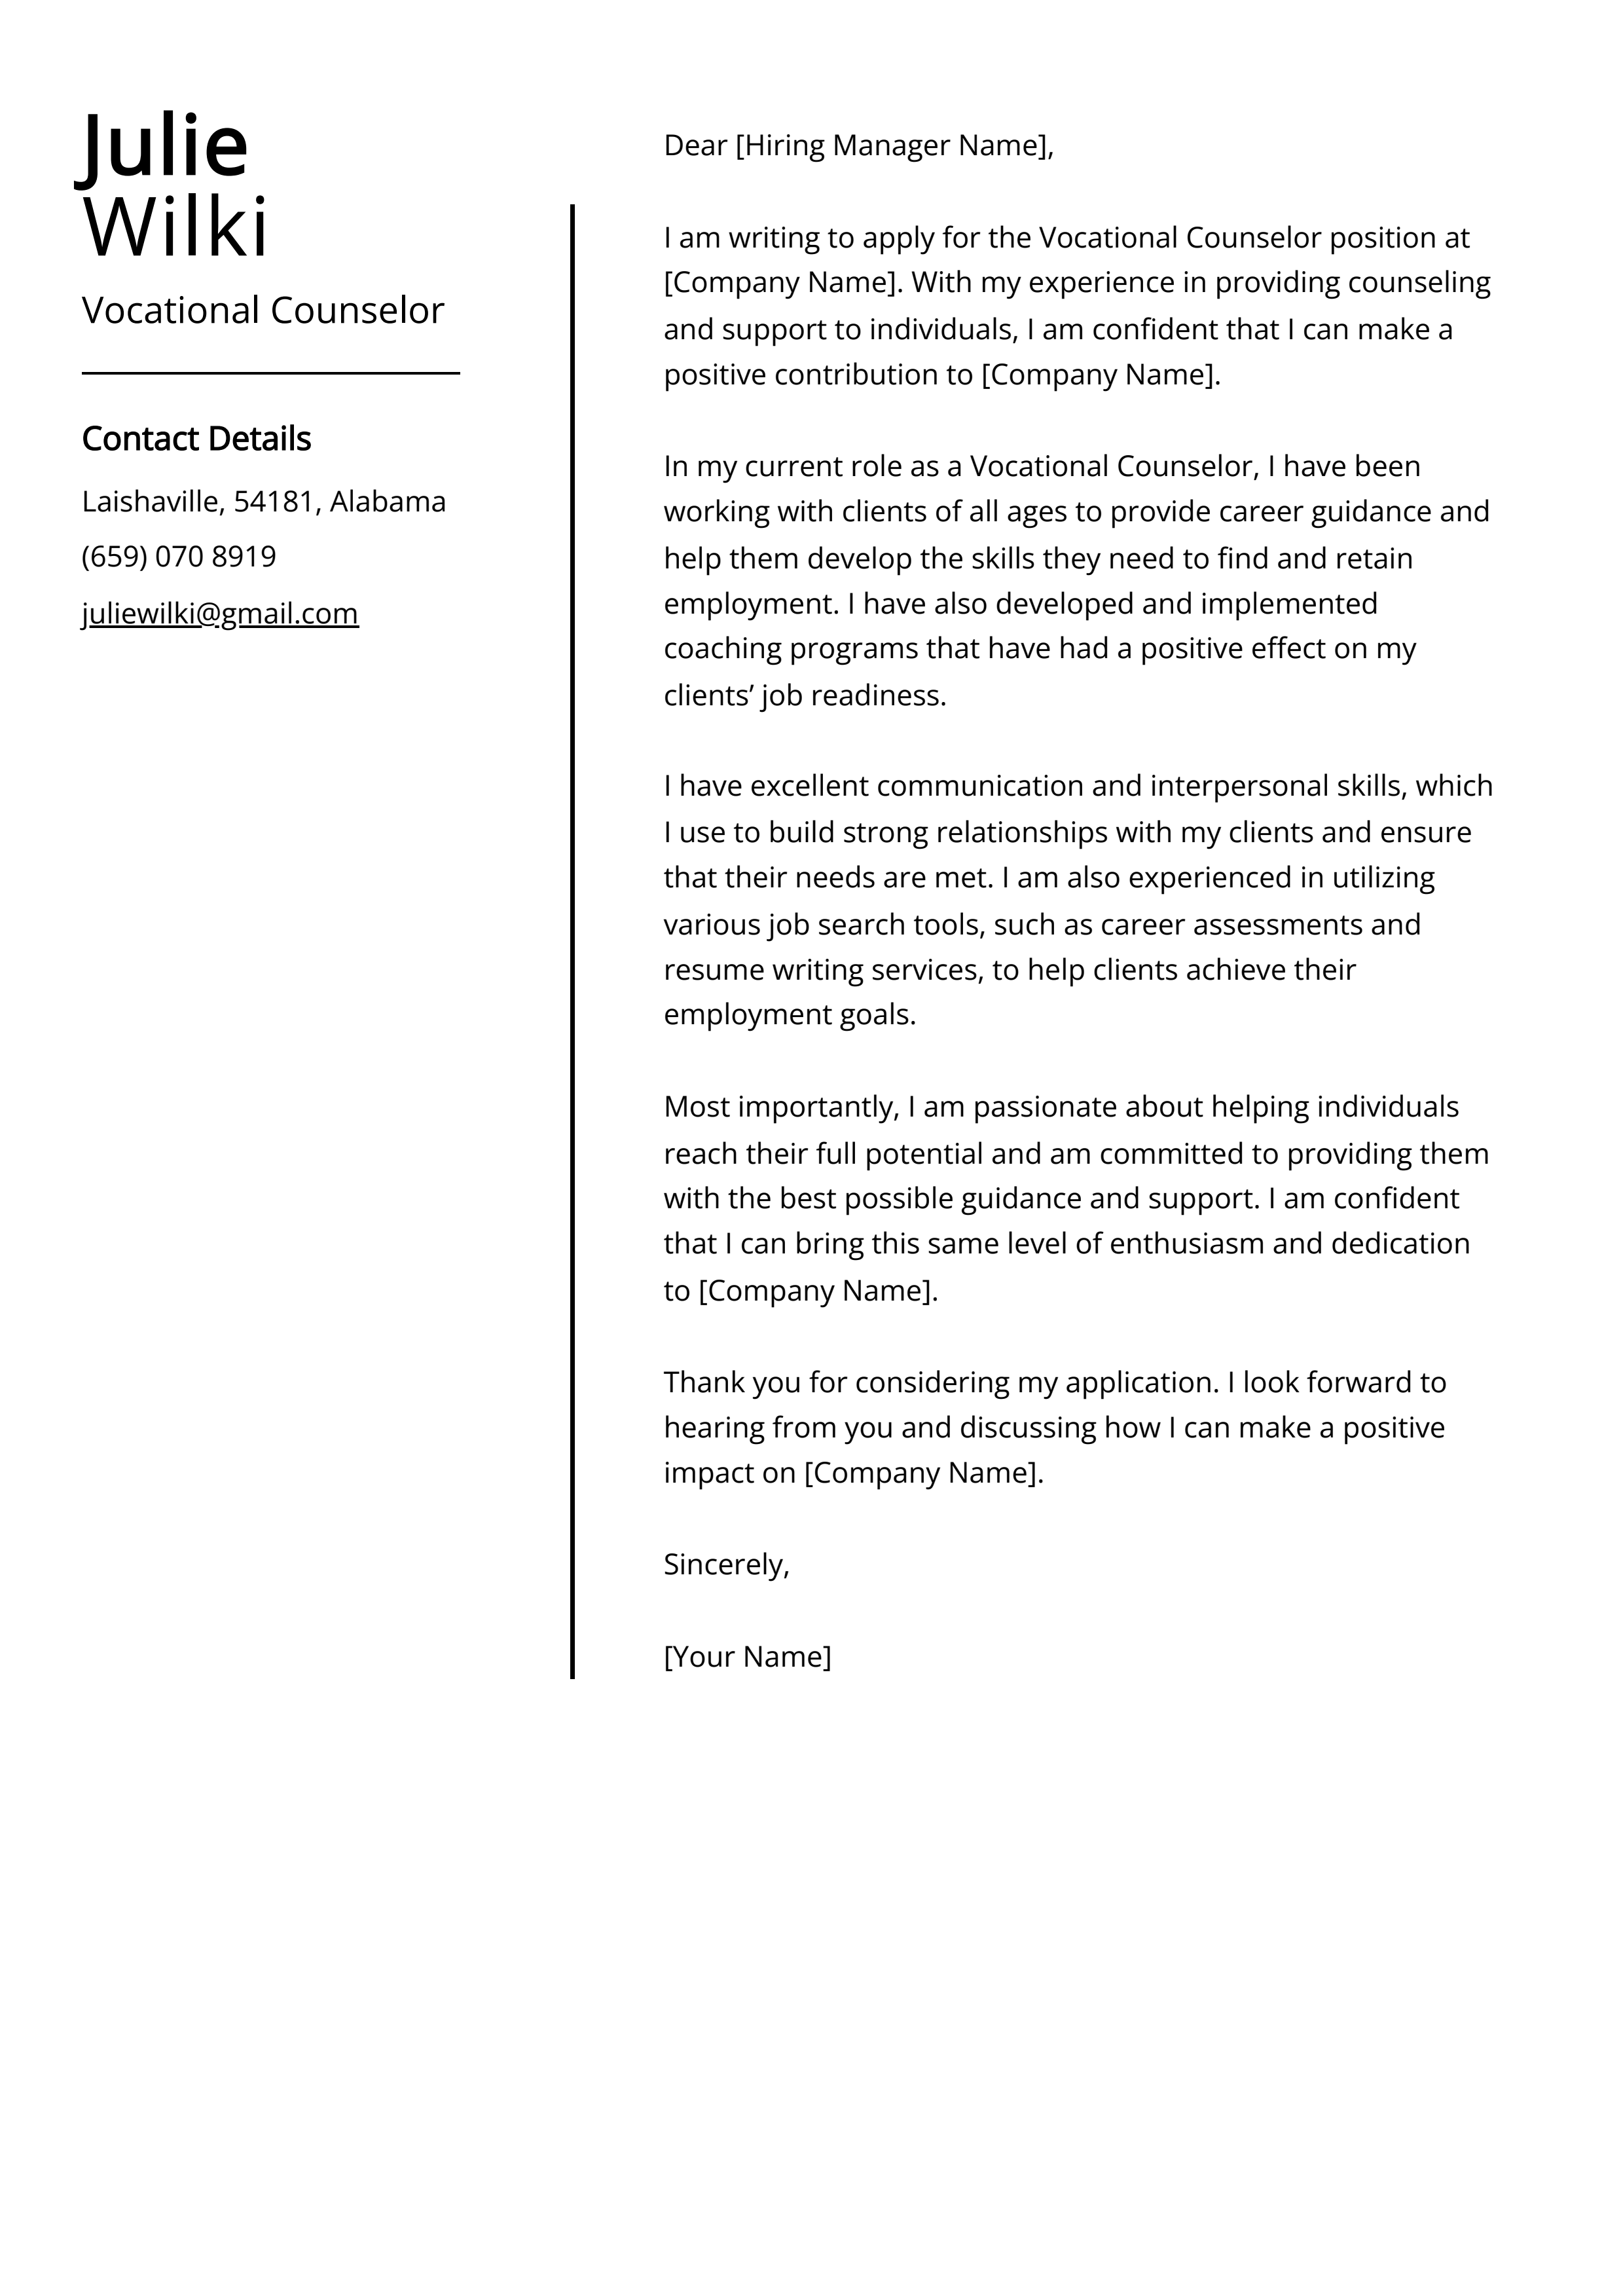 Vocational Counselor Cover Letter Example